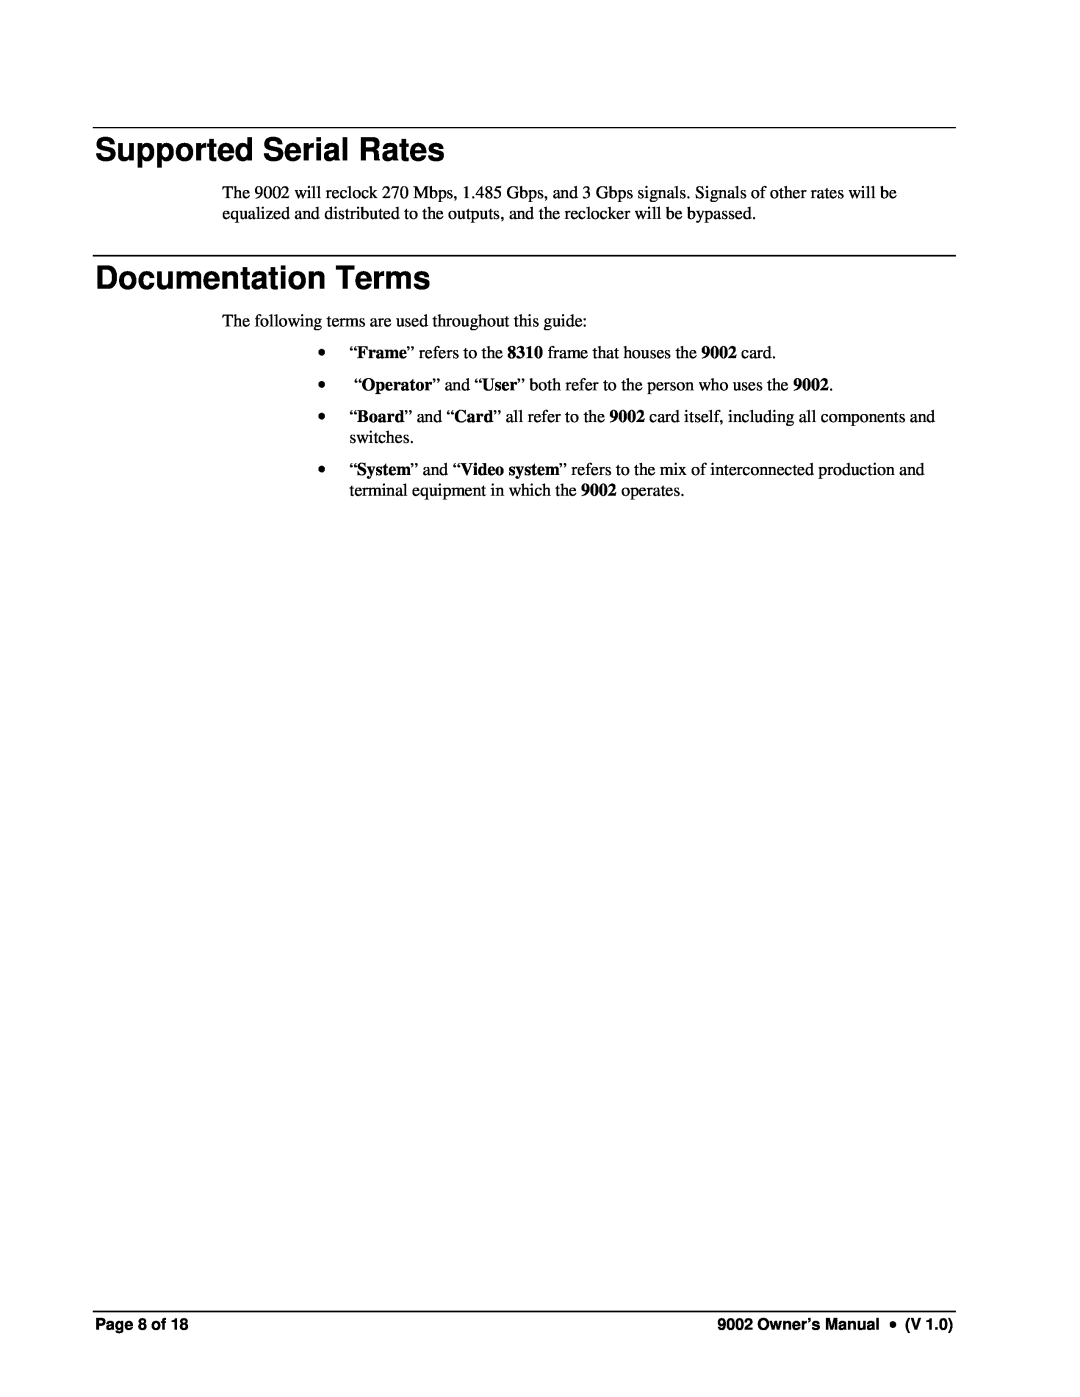 Cobalt Networks 9002 owner manual Supported Serial Rates, Documentation Terms, Page 8 of 